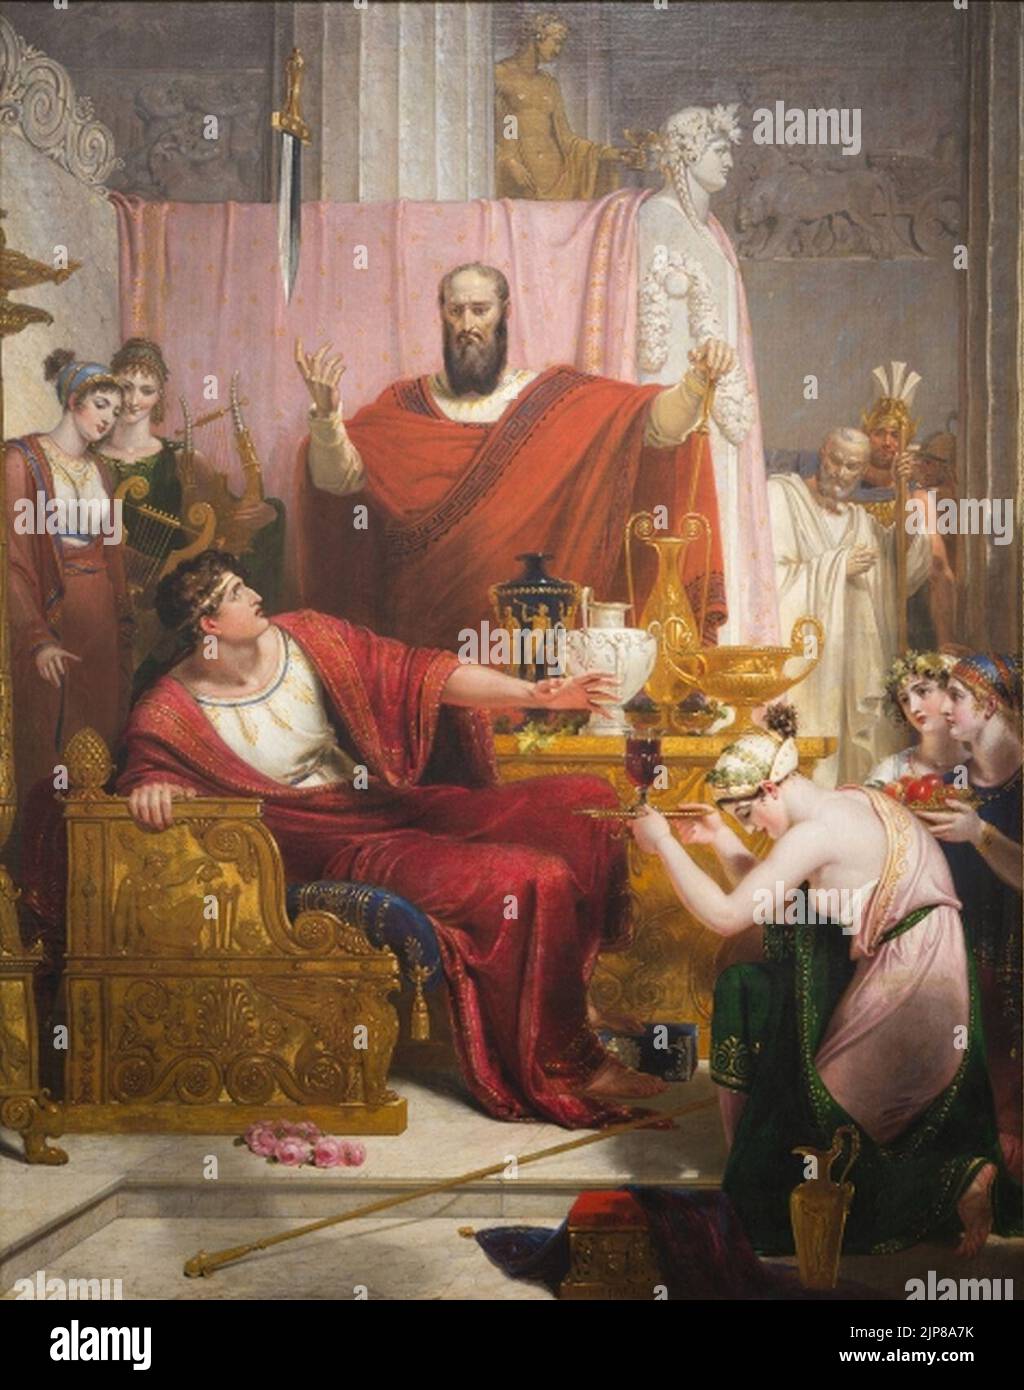 The Sword of Damocles, 1812 Stock Photo